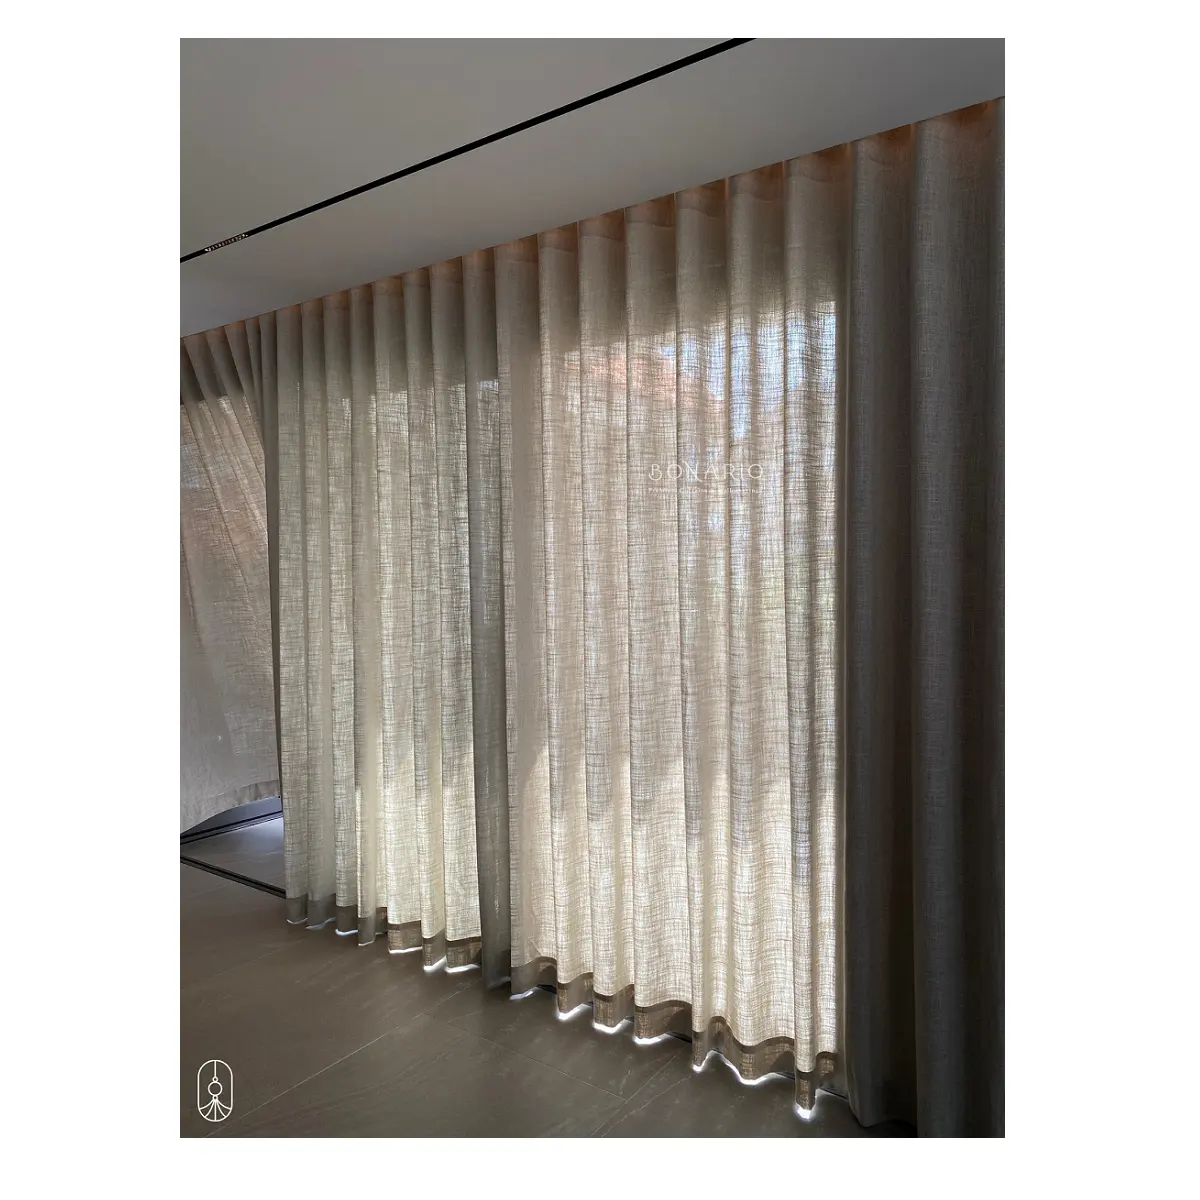 Wholesale Curtains Rod Pocket Decoration Material Quality POLYESTER COTTON Oriel Window Type OEM Support Dimout Curtain Vietnam